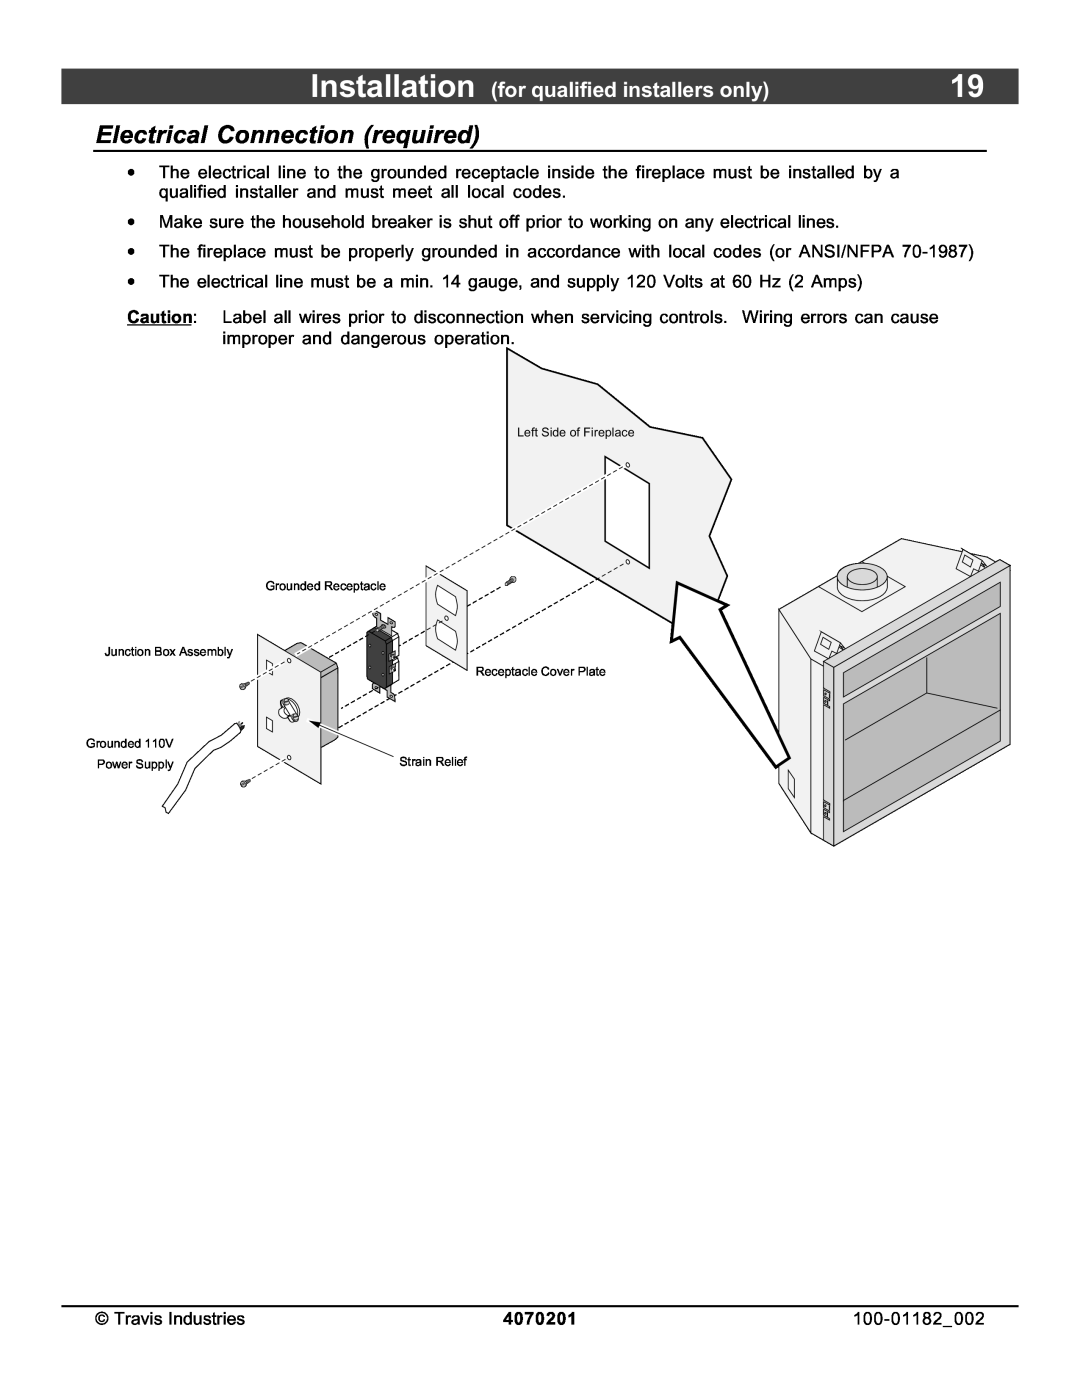 North Star 864 HH installation manual Electrical Connection required, Installation for qualified installers only, 4070201 